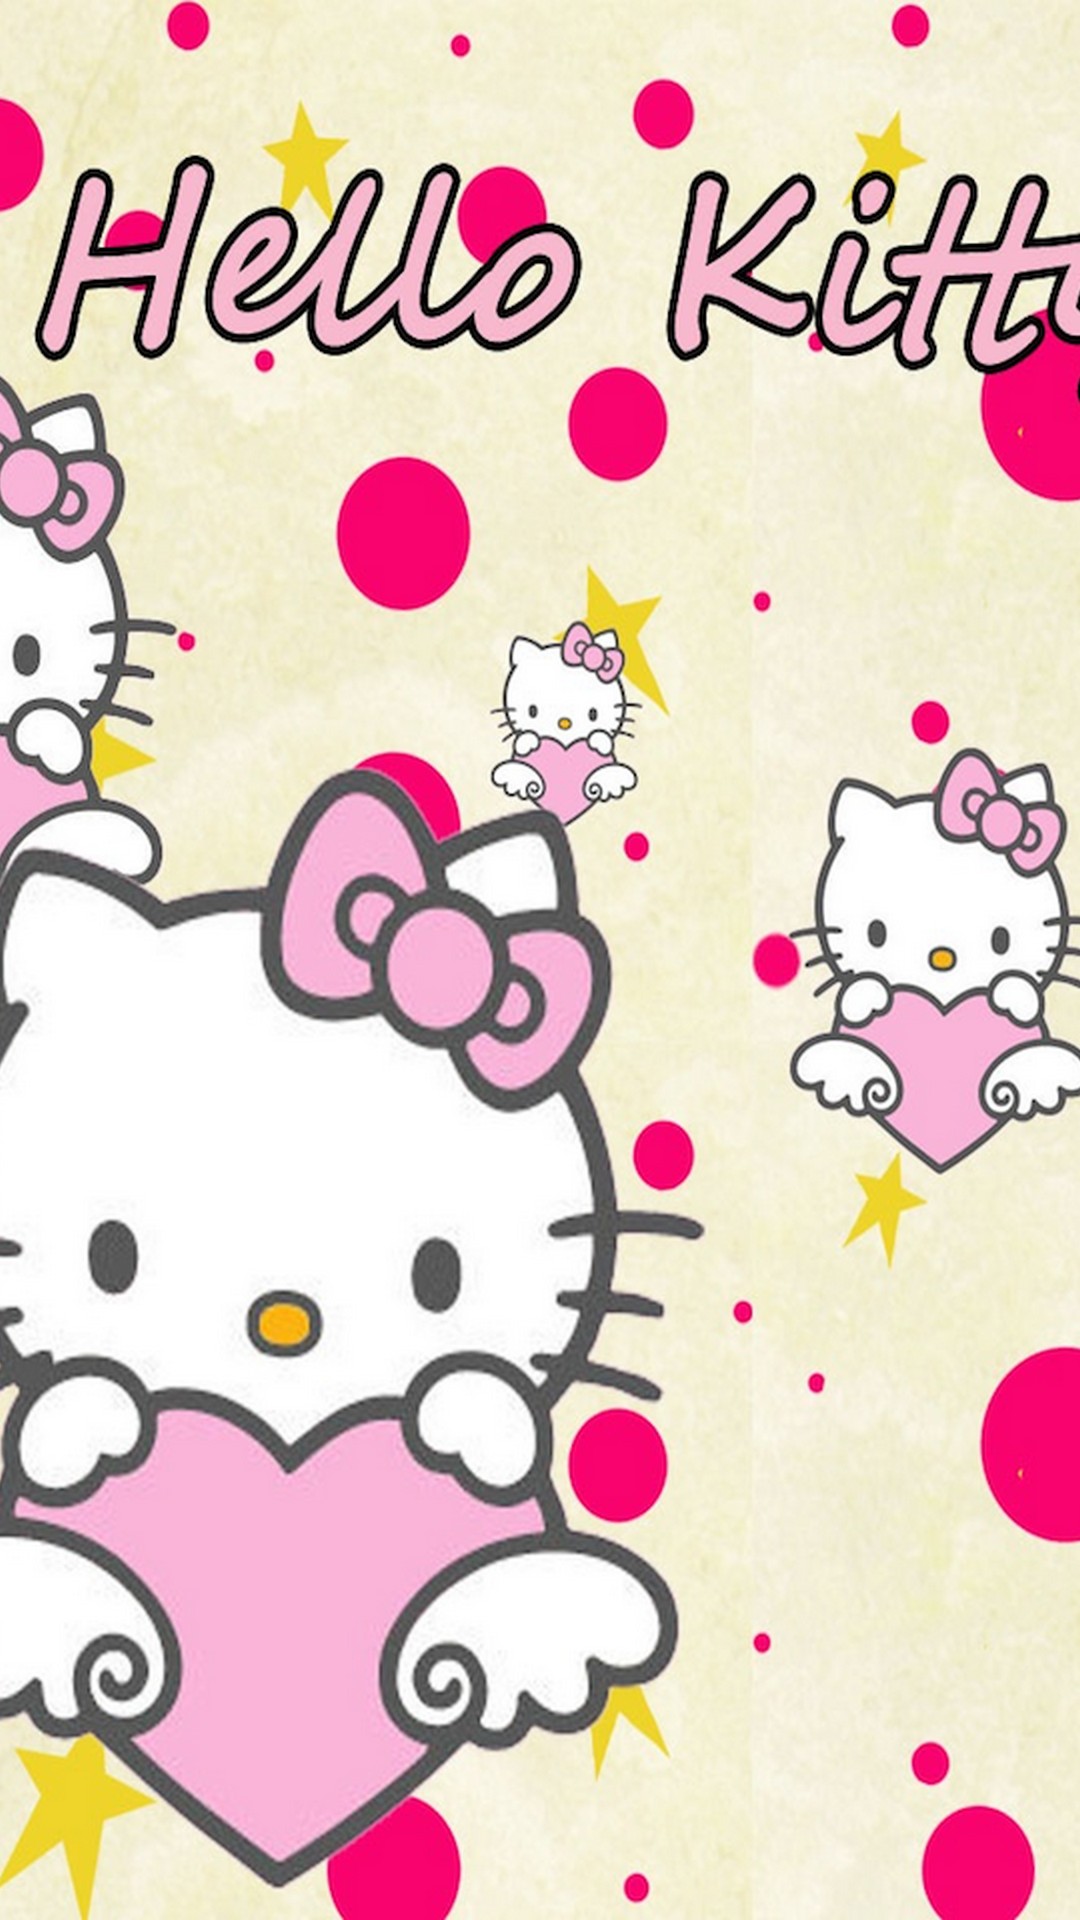 Sanrio Hello Kitty HD Wallpaper For iPhone with resolution 1080X1920 pixel. You can use this wallpaper as background for your desktop Computer Screensavers, Android or iPhone smartphones